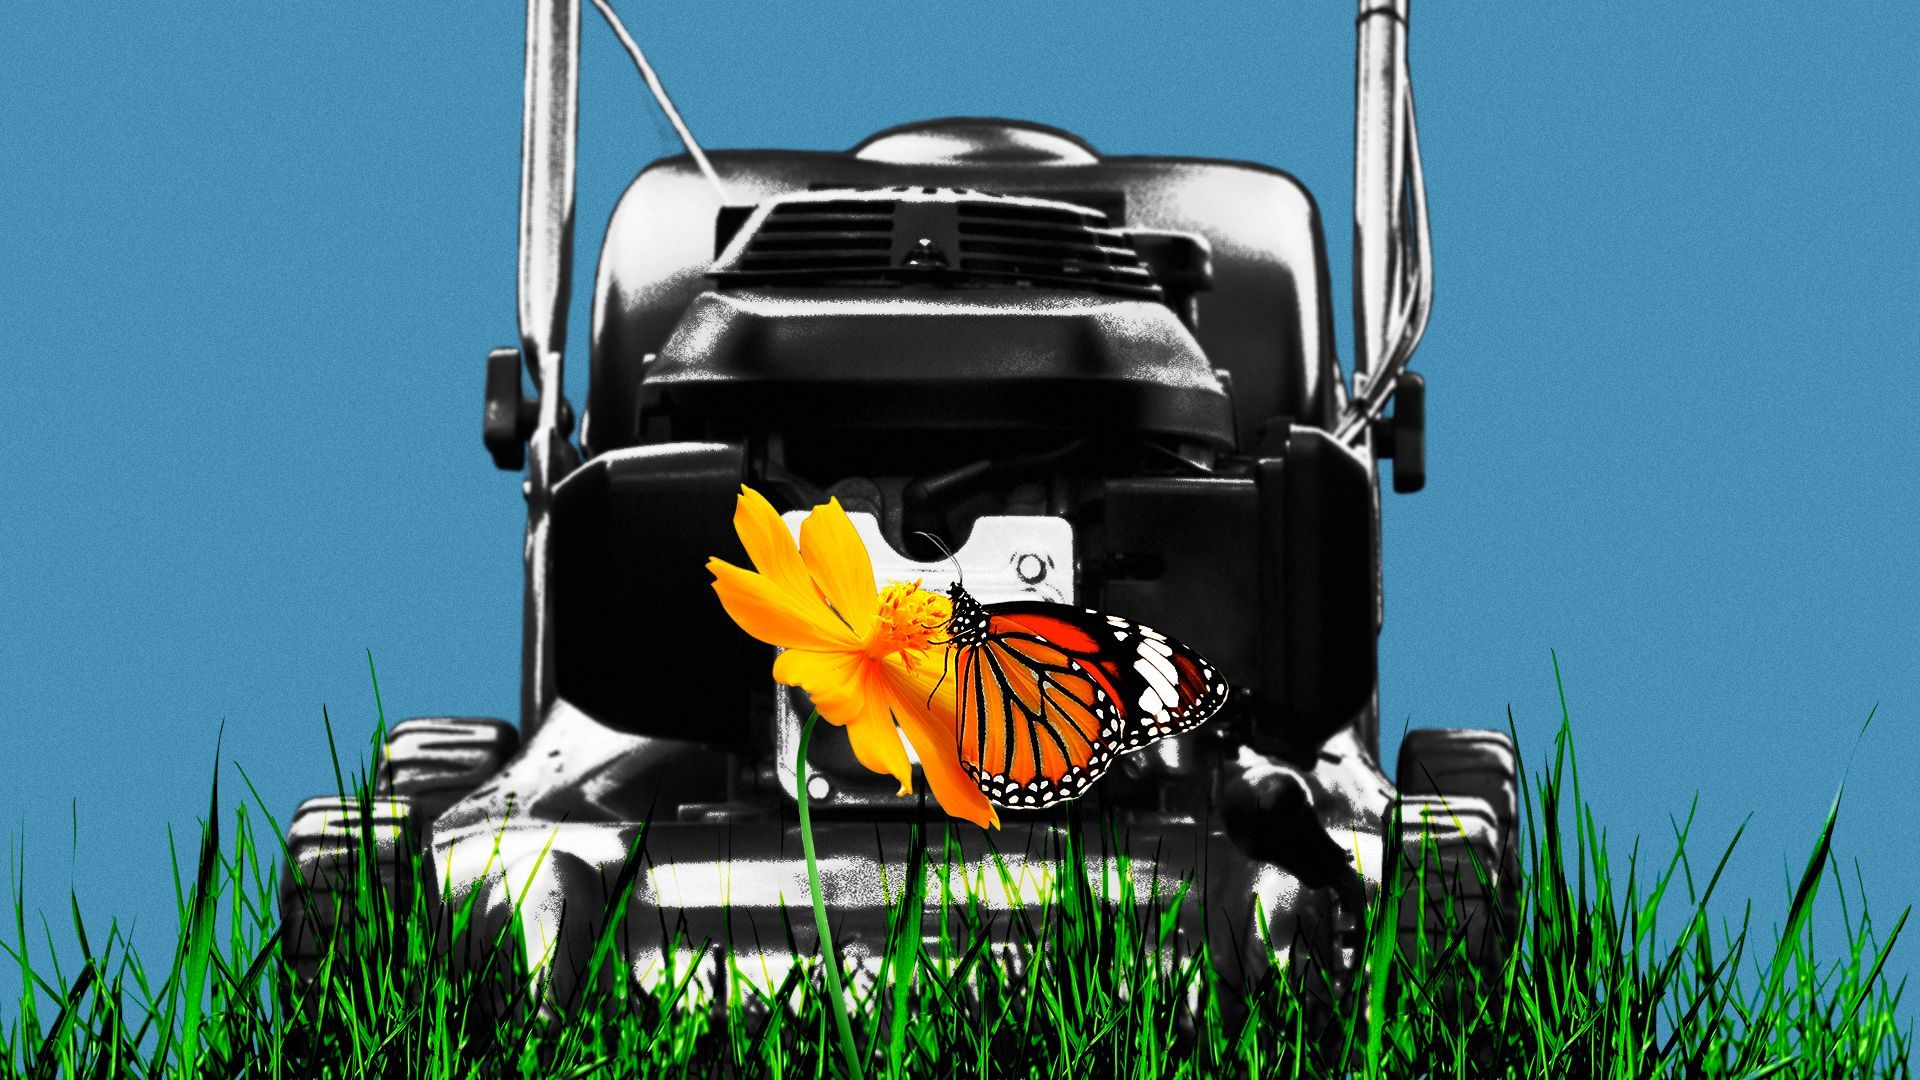 Illustration of a lawnmower towering over a butterfly on a flower.